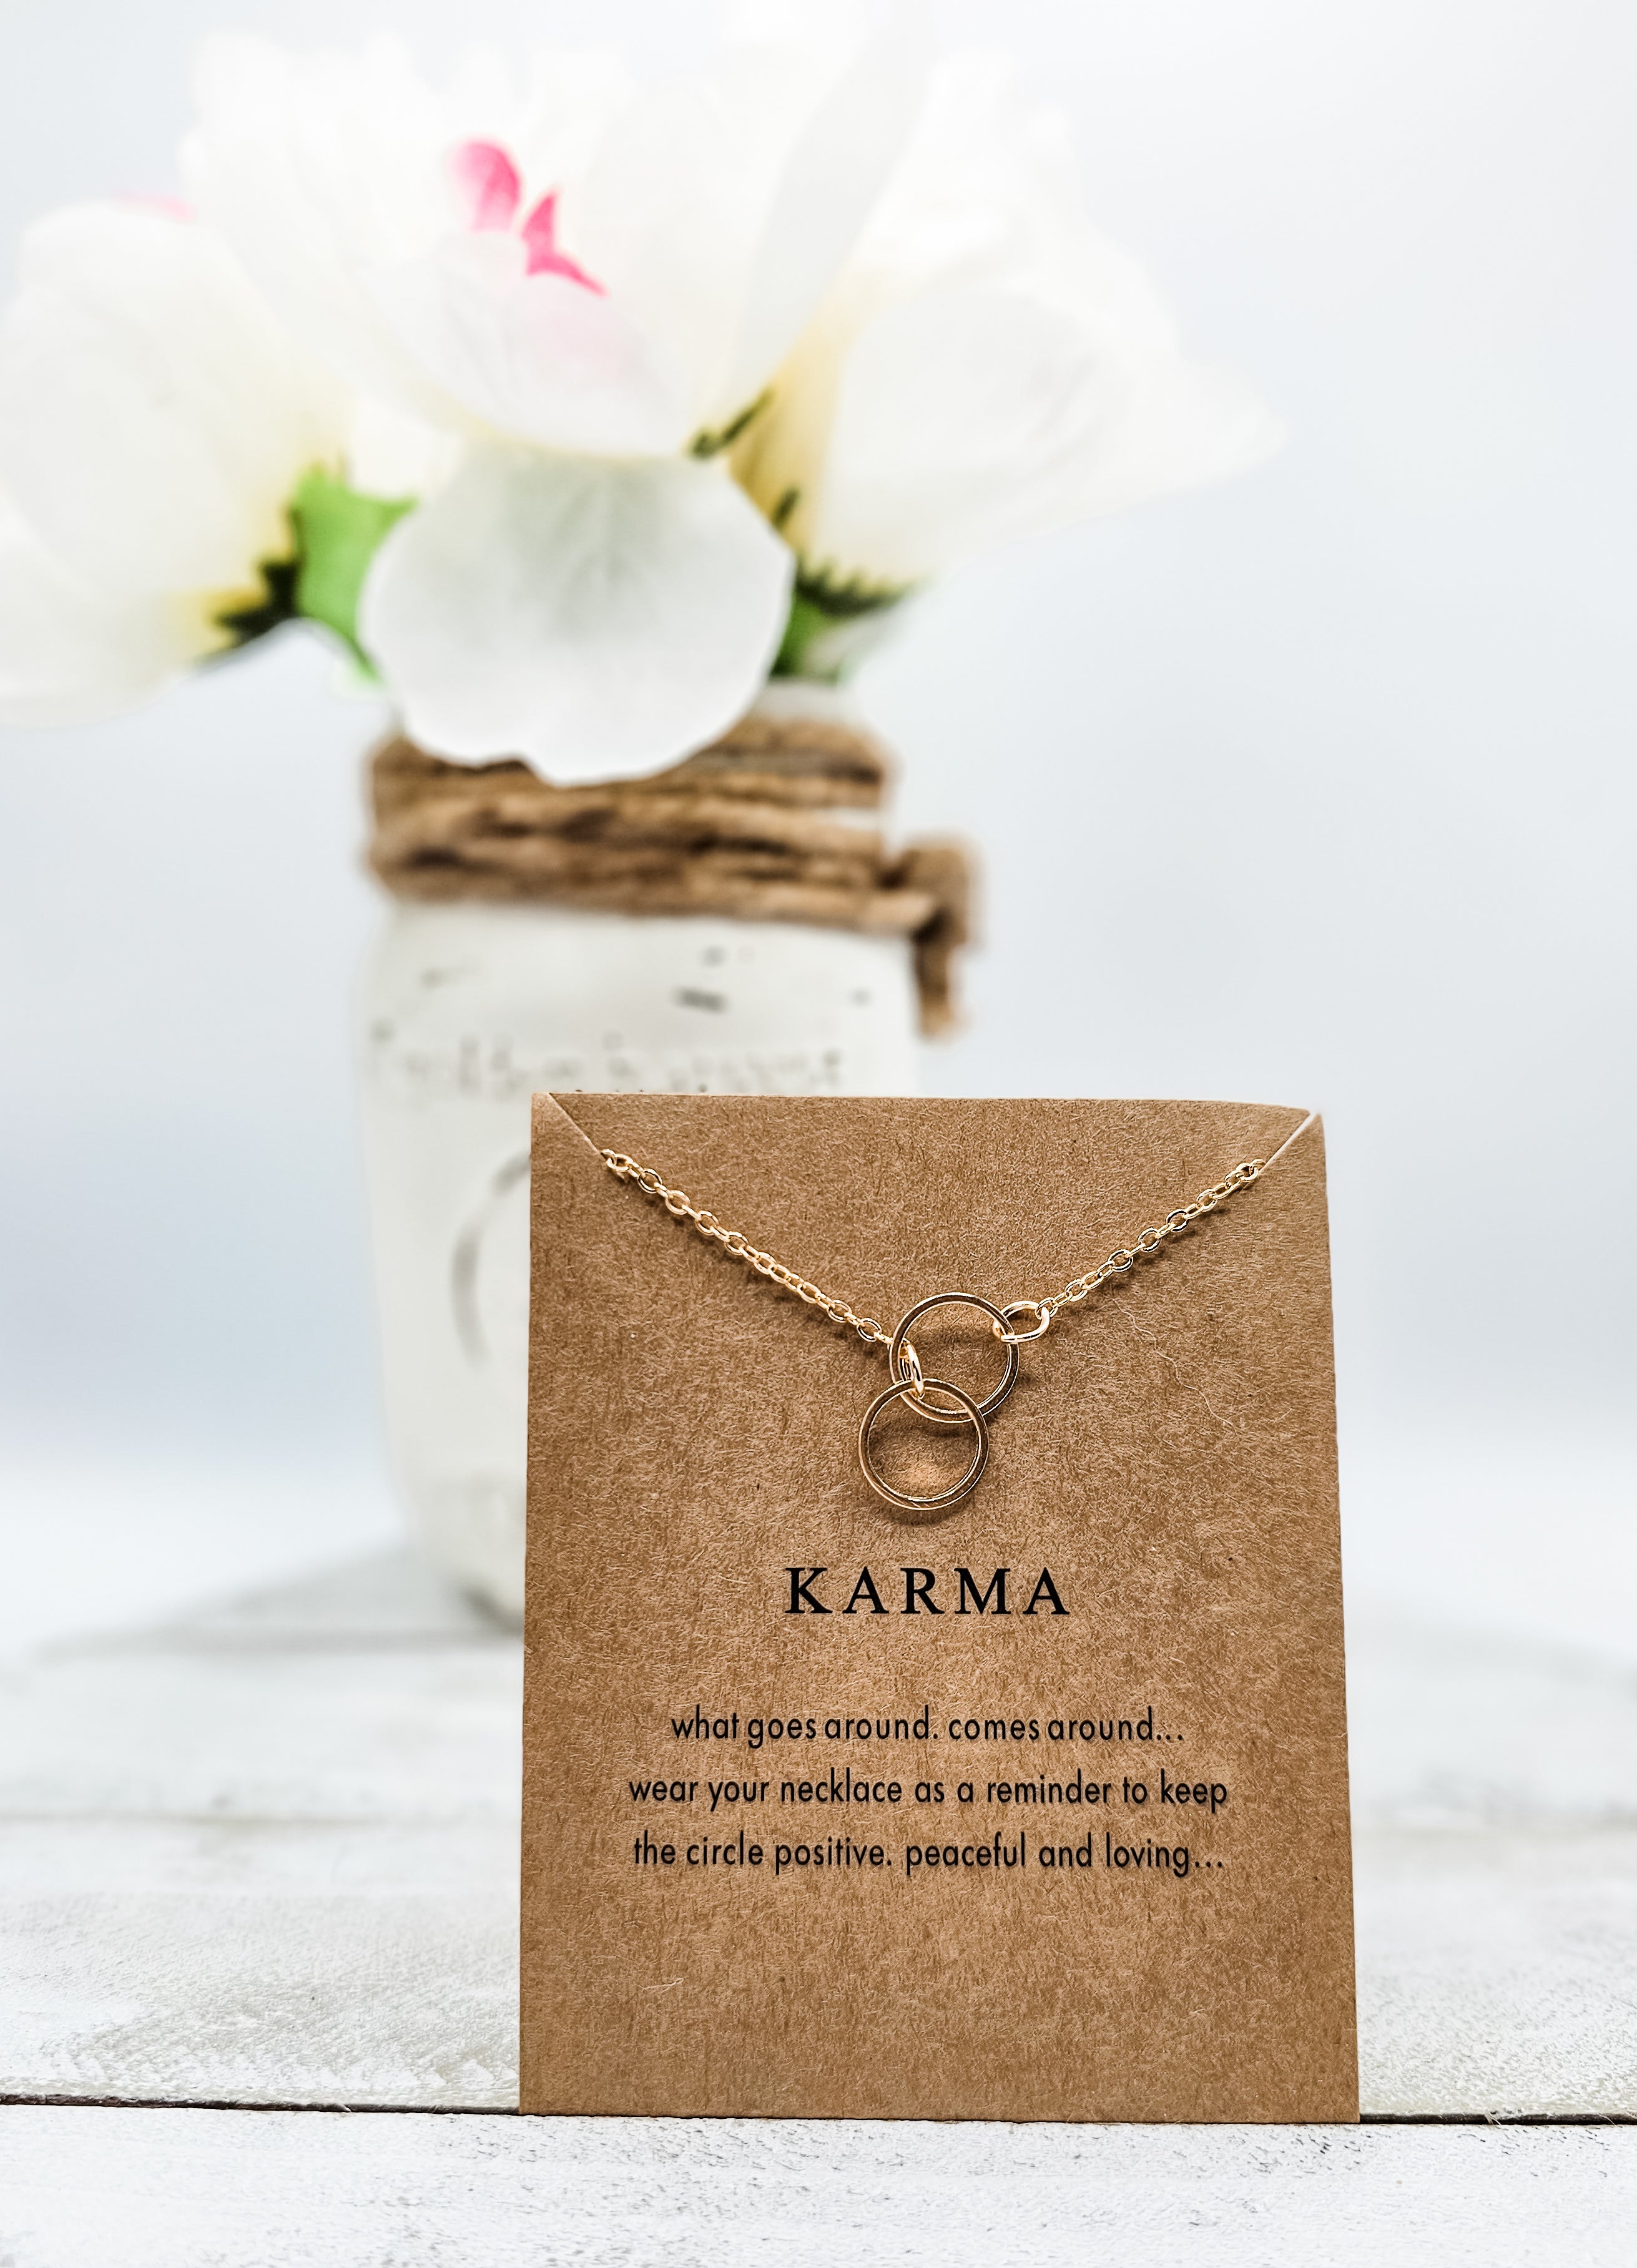 Karma - Inspirational and Meaningful Pendant Necklace